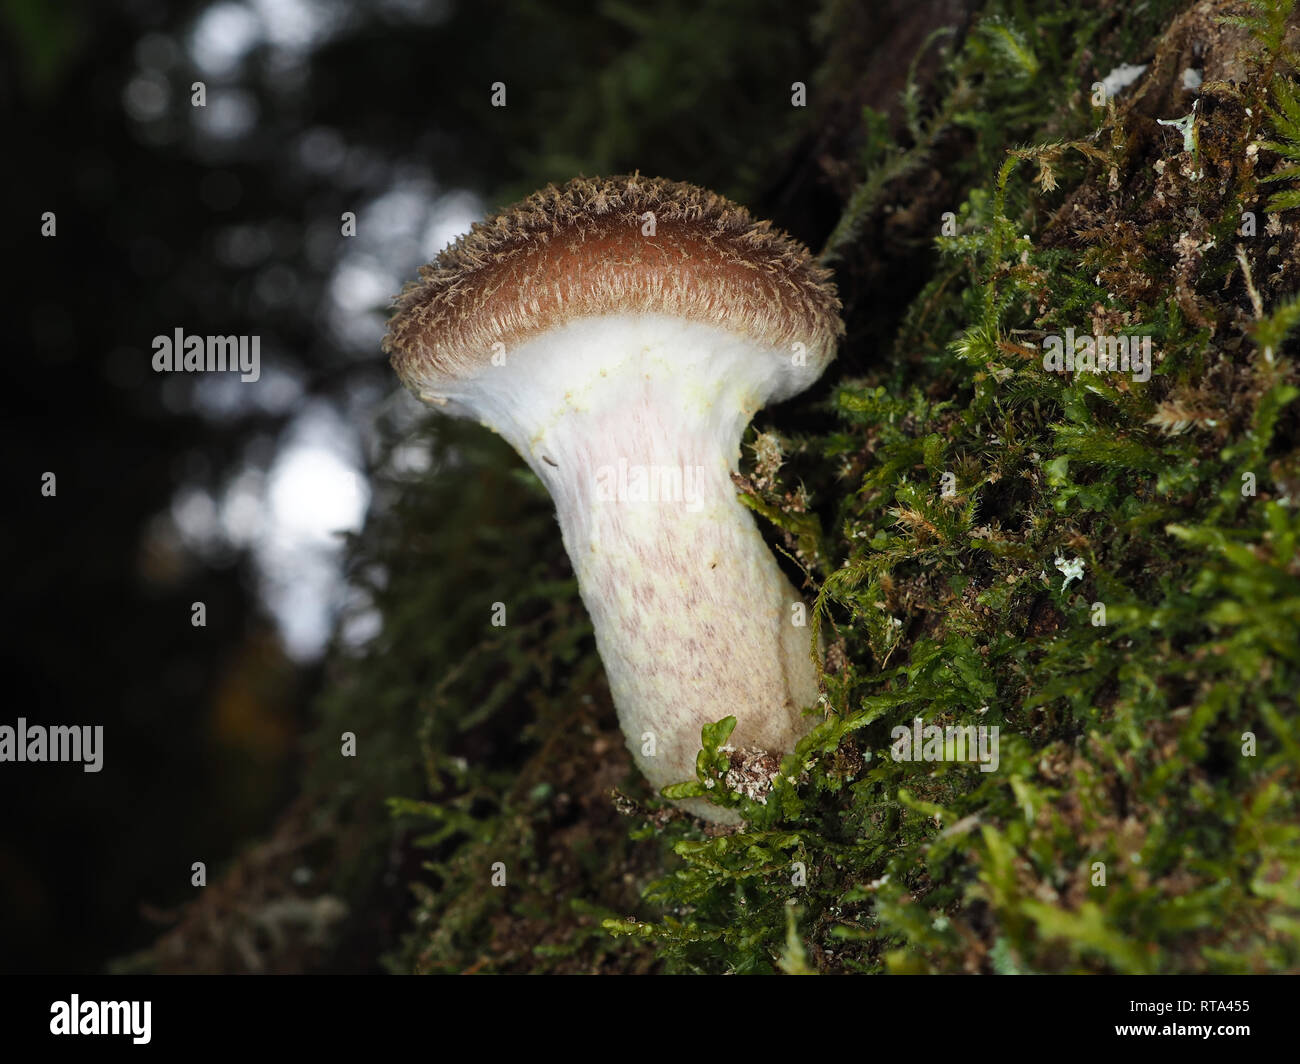 Young honey mushroom (Armillaria sp.) in a forest in Washington state, USA Stock Photo